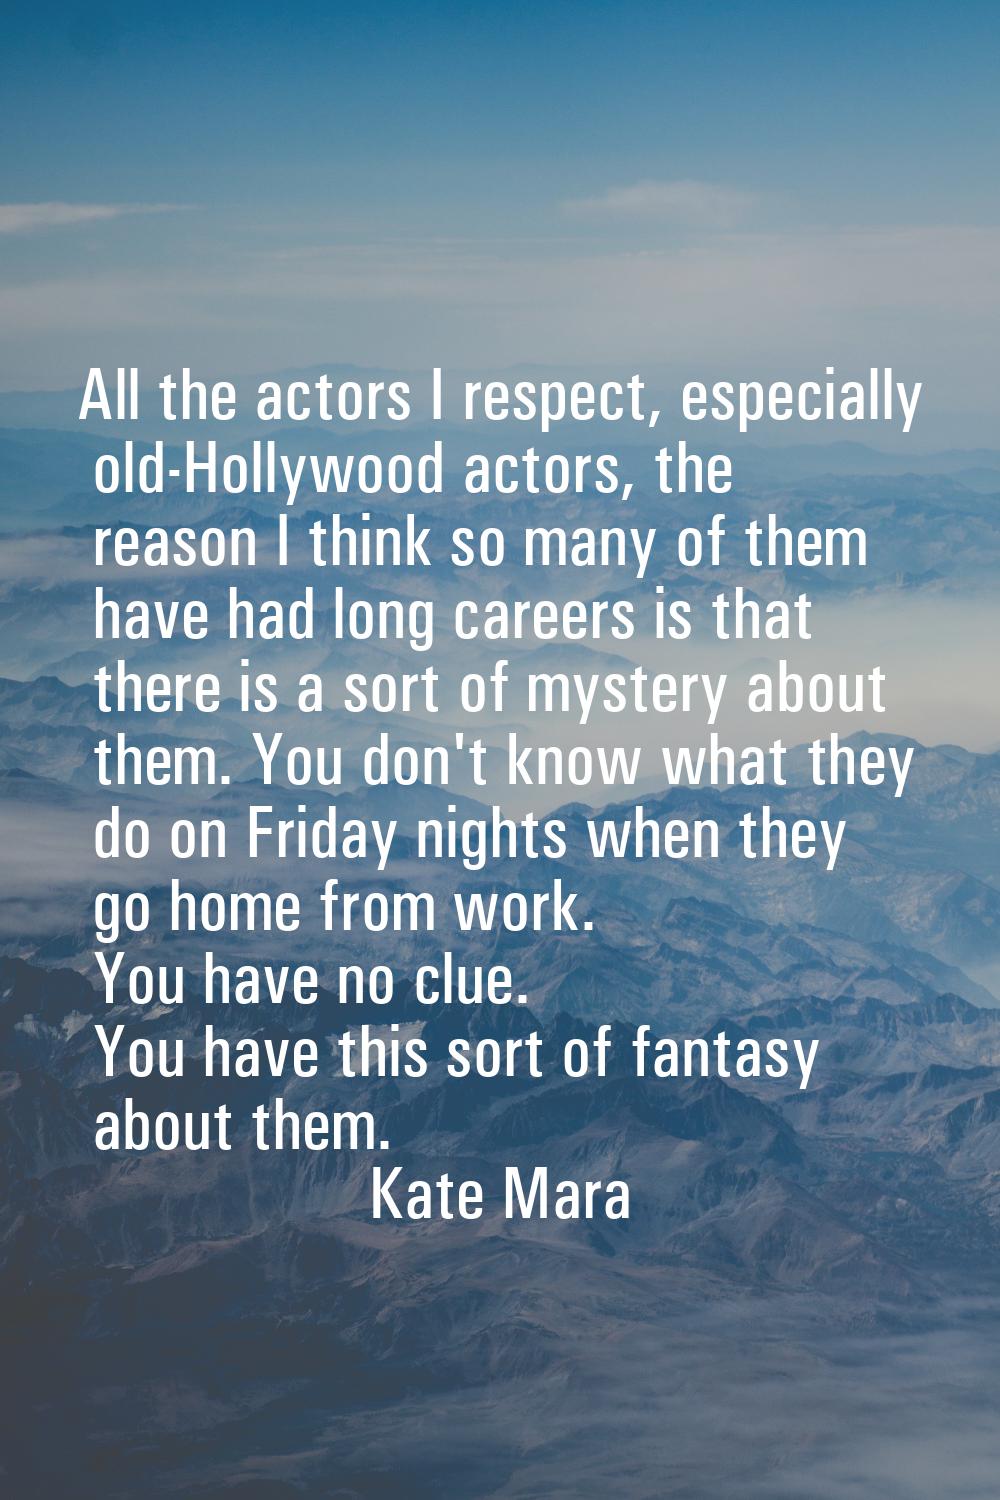 All the actors I respect, especially old-Hollywood actors, the reason I think so many of them have 